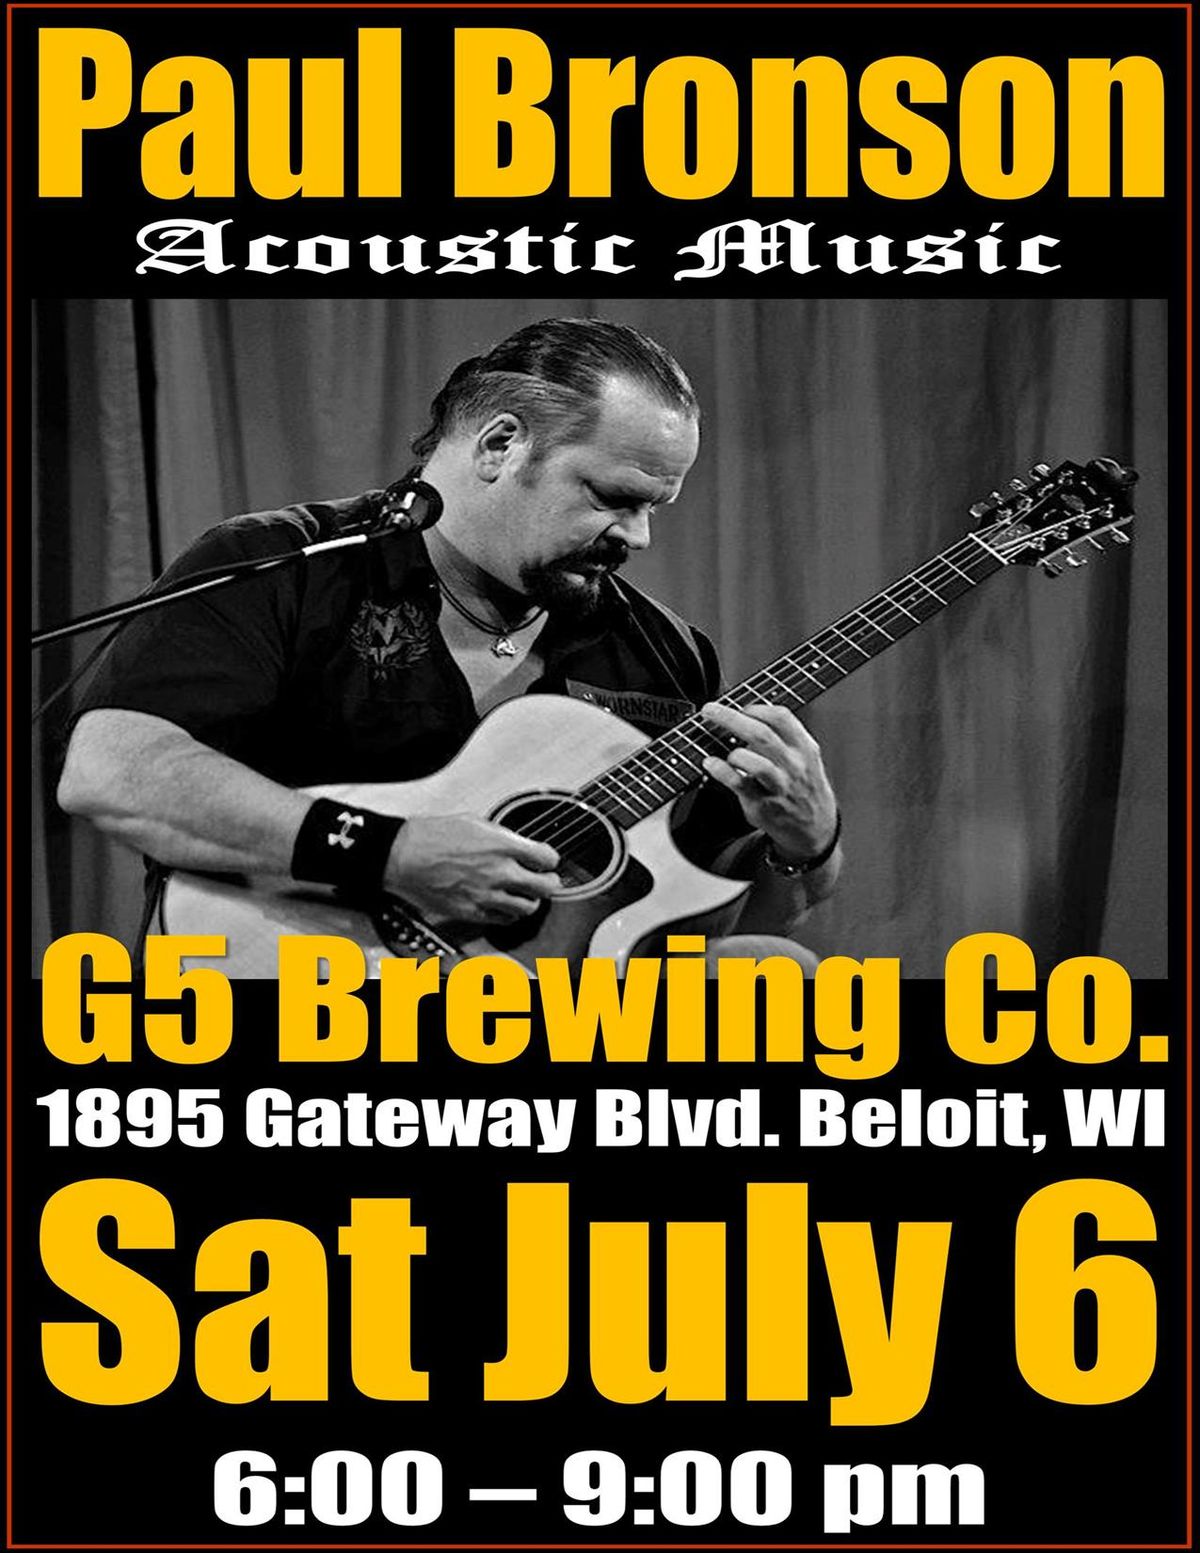 Paul Bronson Acoustic Music @ G5 Brewing Co - Beloit, WI - Saturday, July 6th